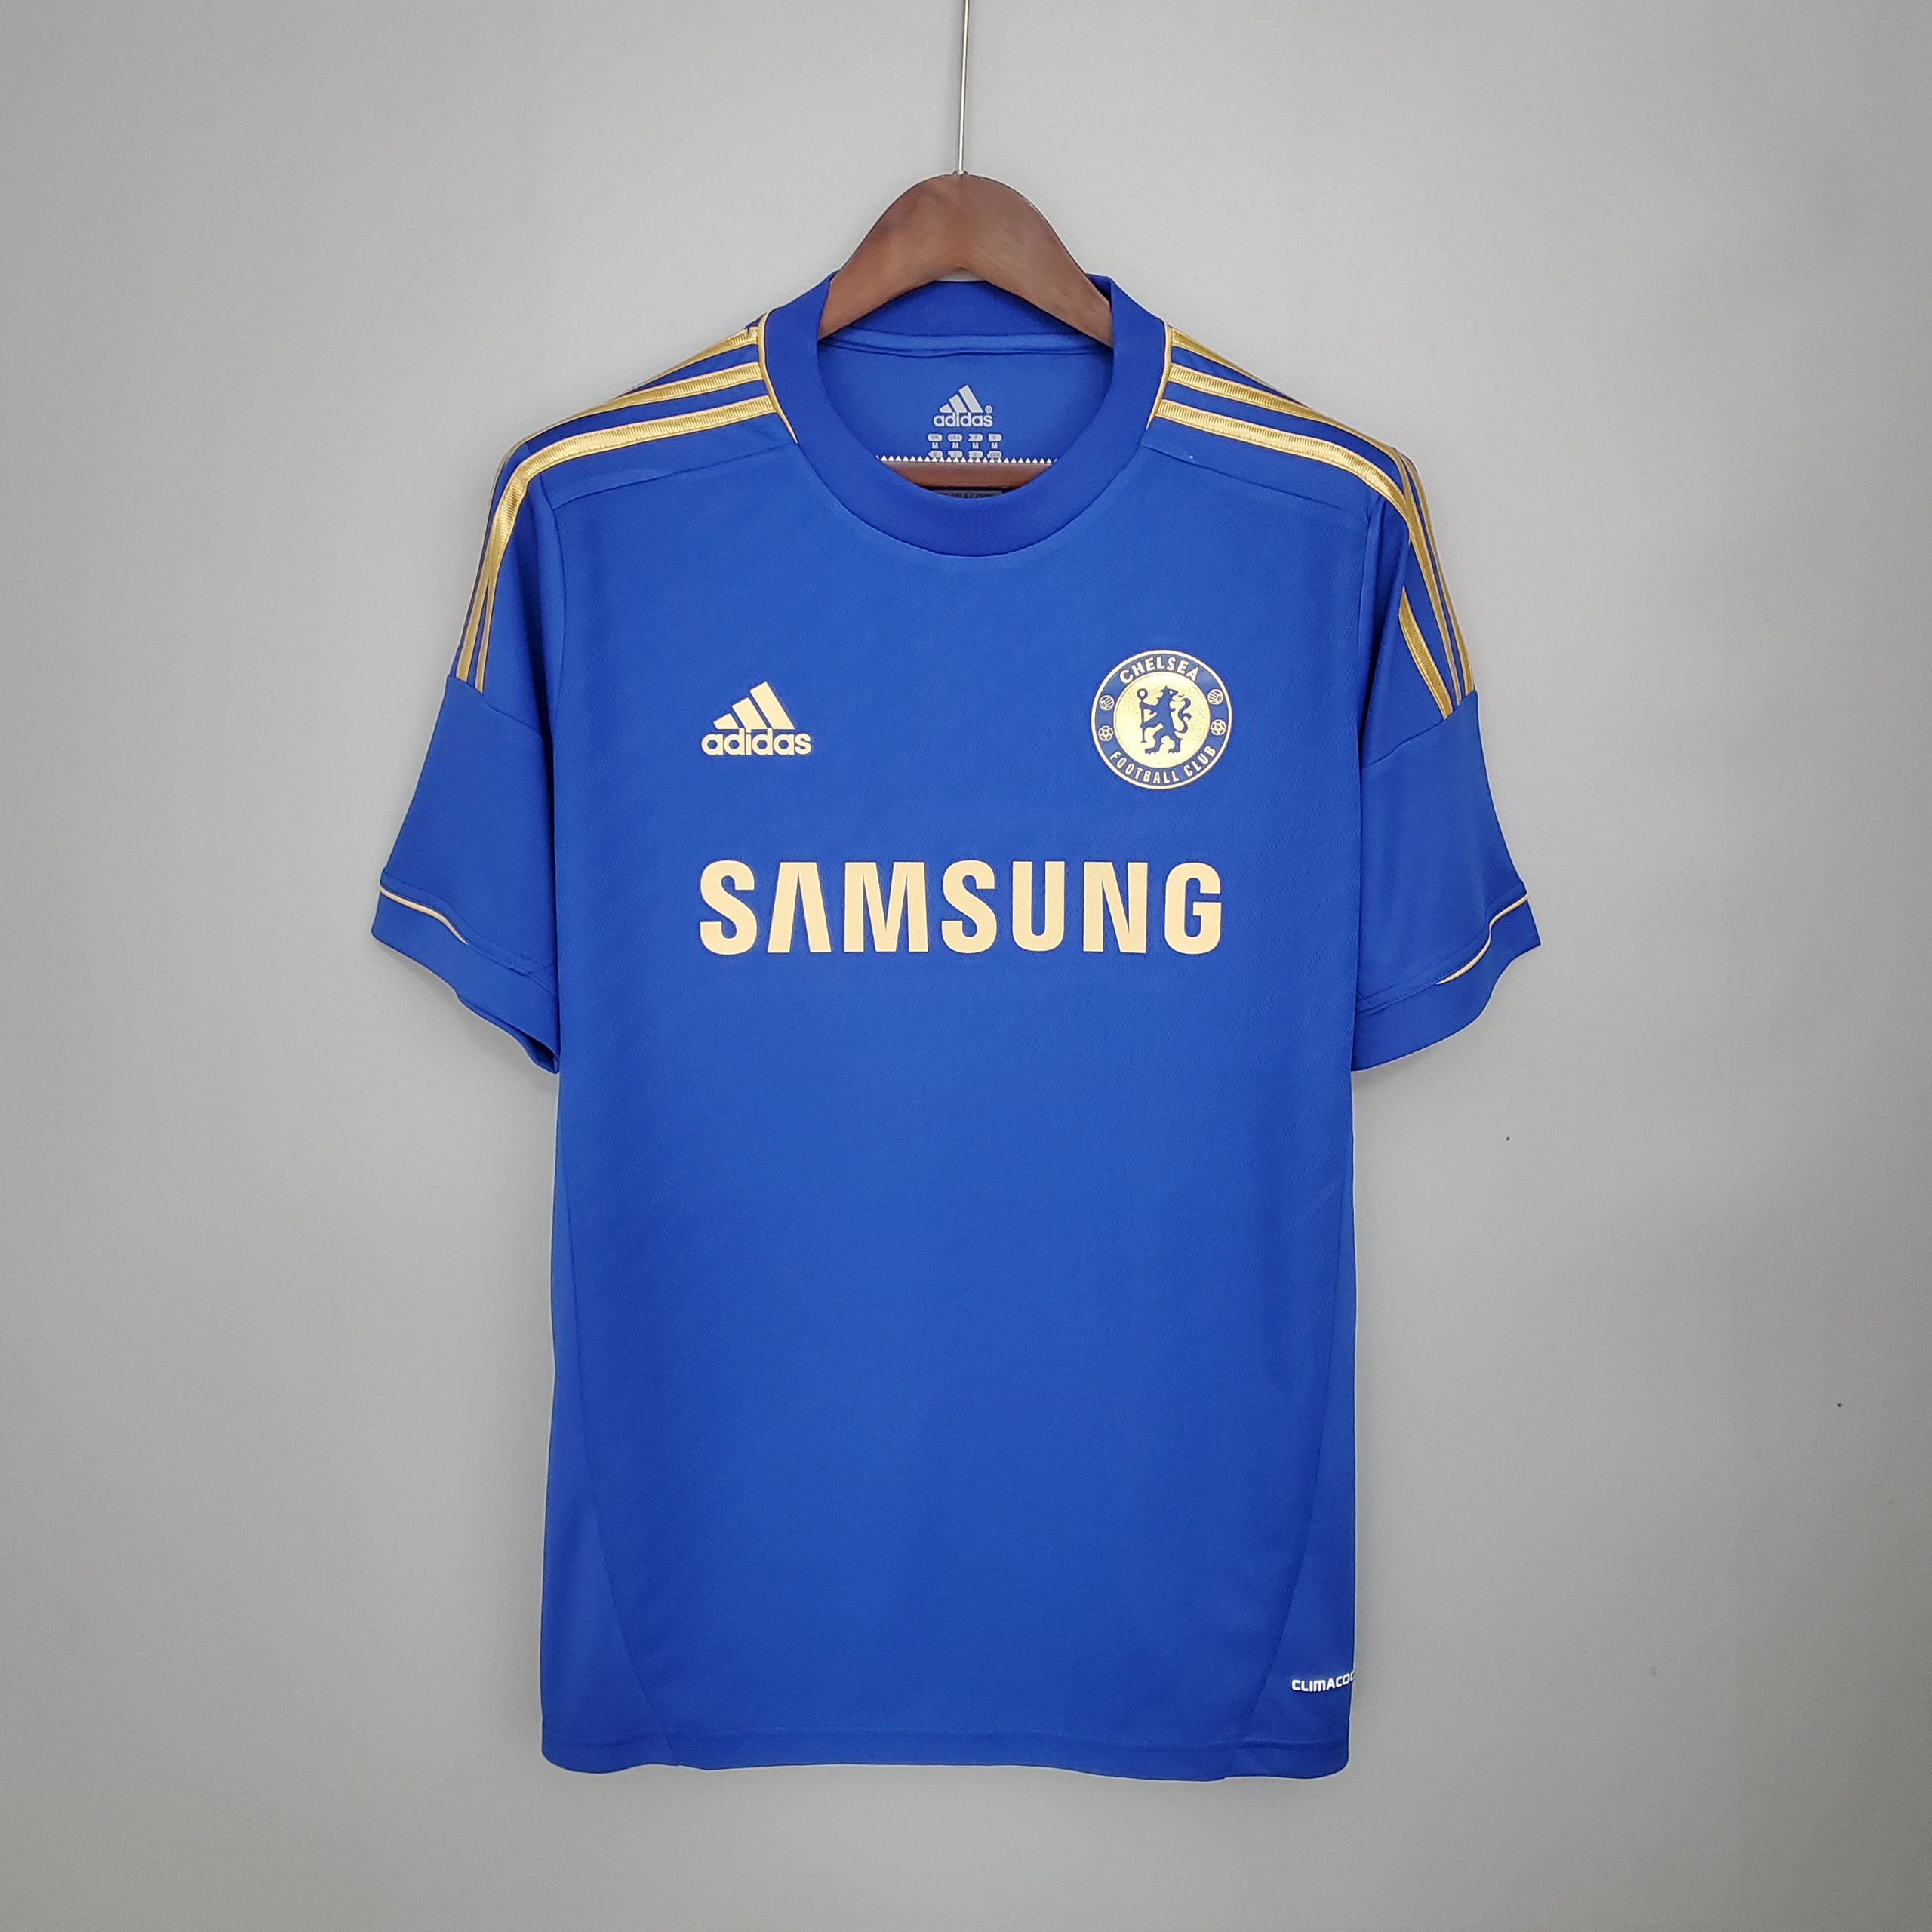 Chelsea Football Club - You can pre-order your Drogba home shirt